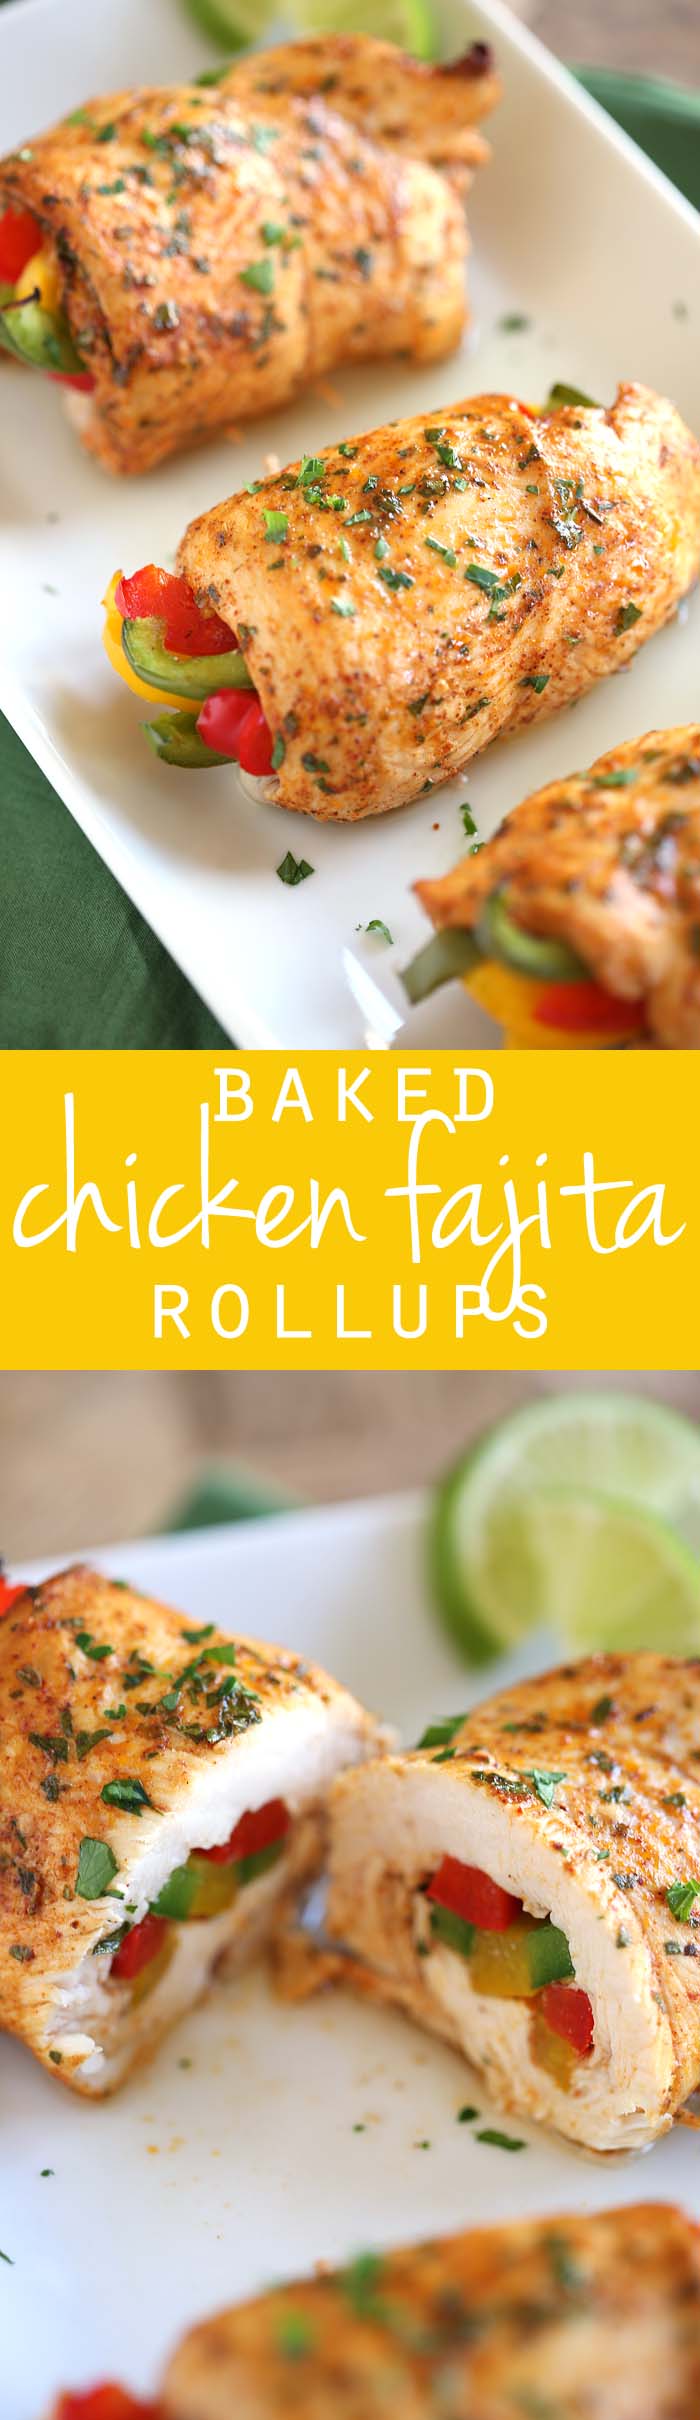 These Baked Chicken Fajita Roll-Ups are easy to make, super moist and make the perfect delicious low-carb meal!  eat-yourself-skinny.com